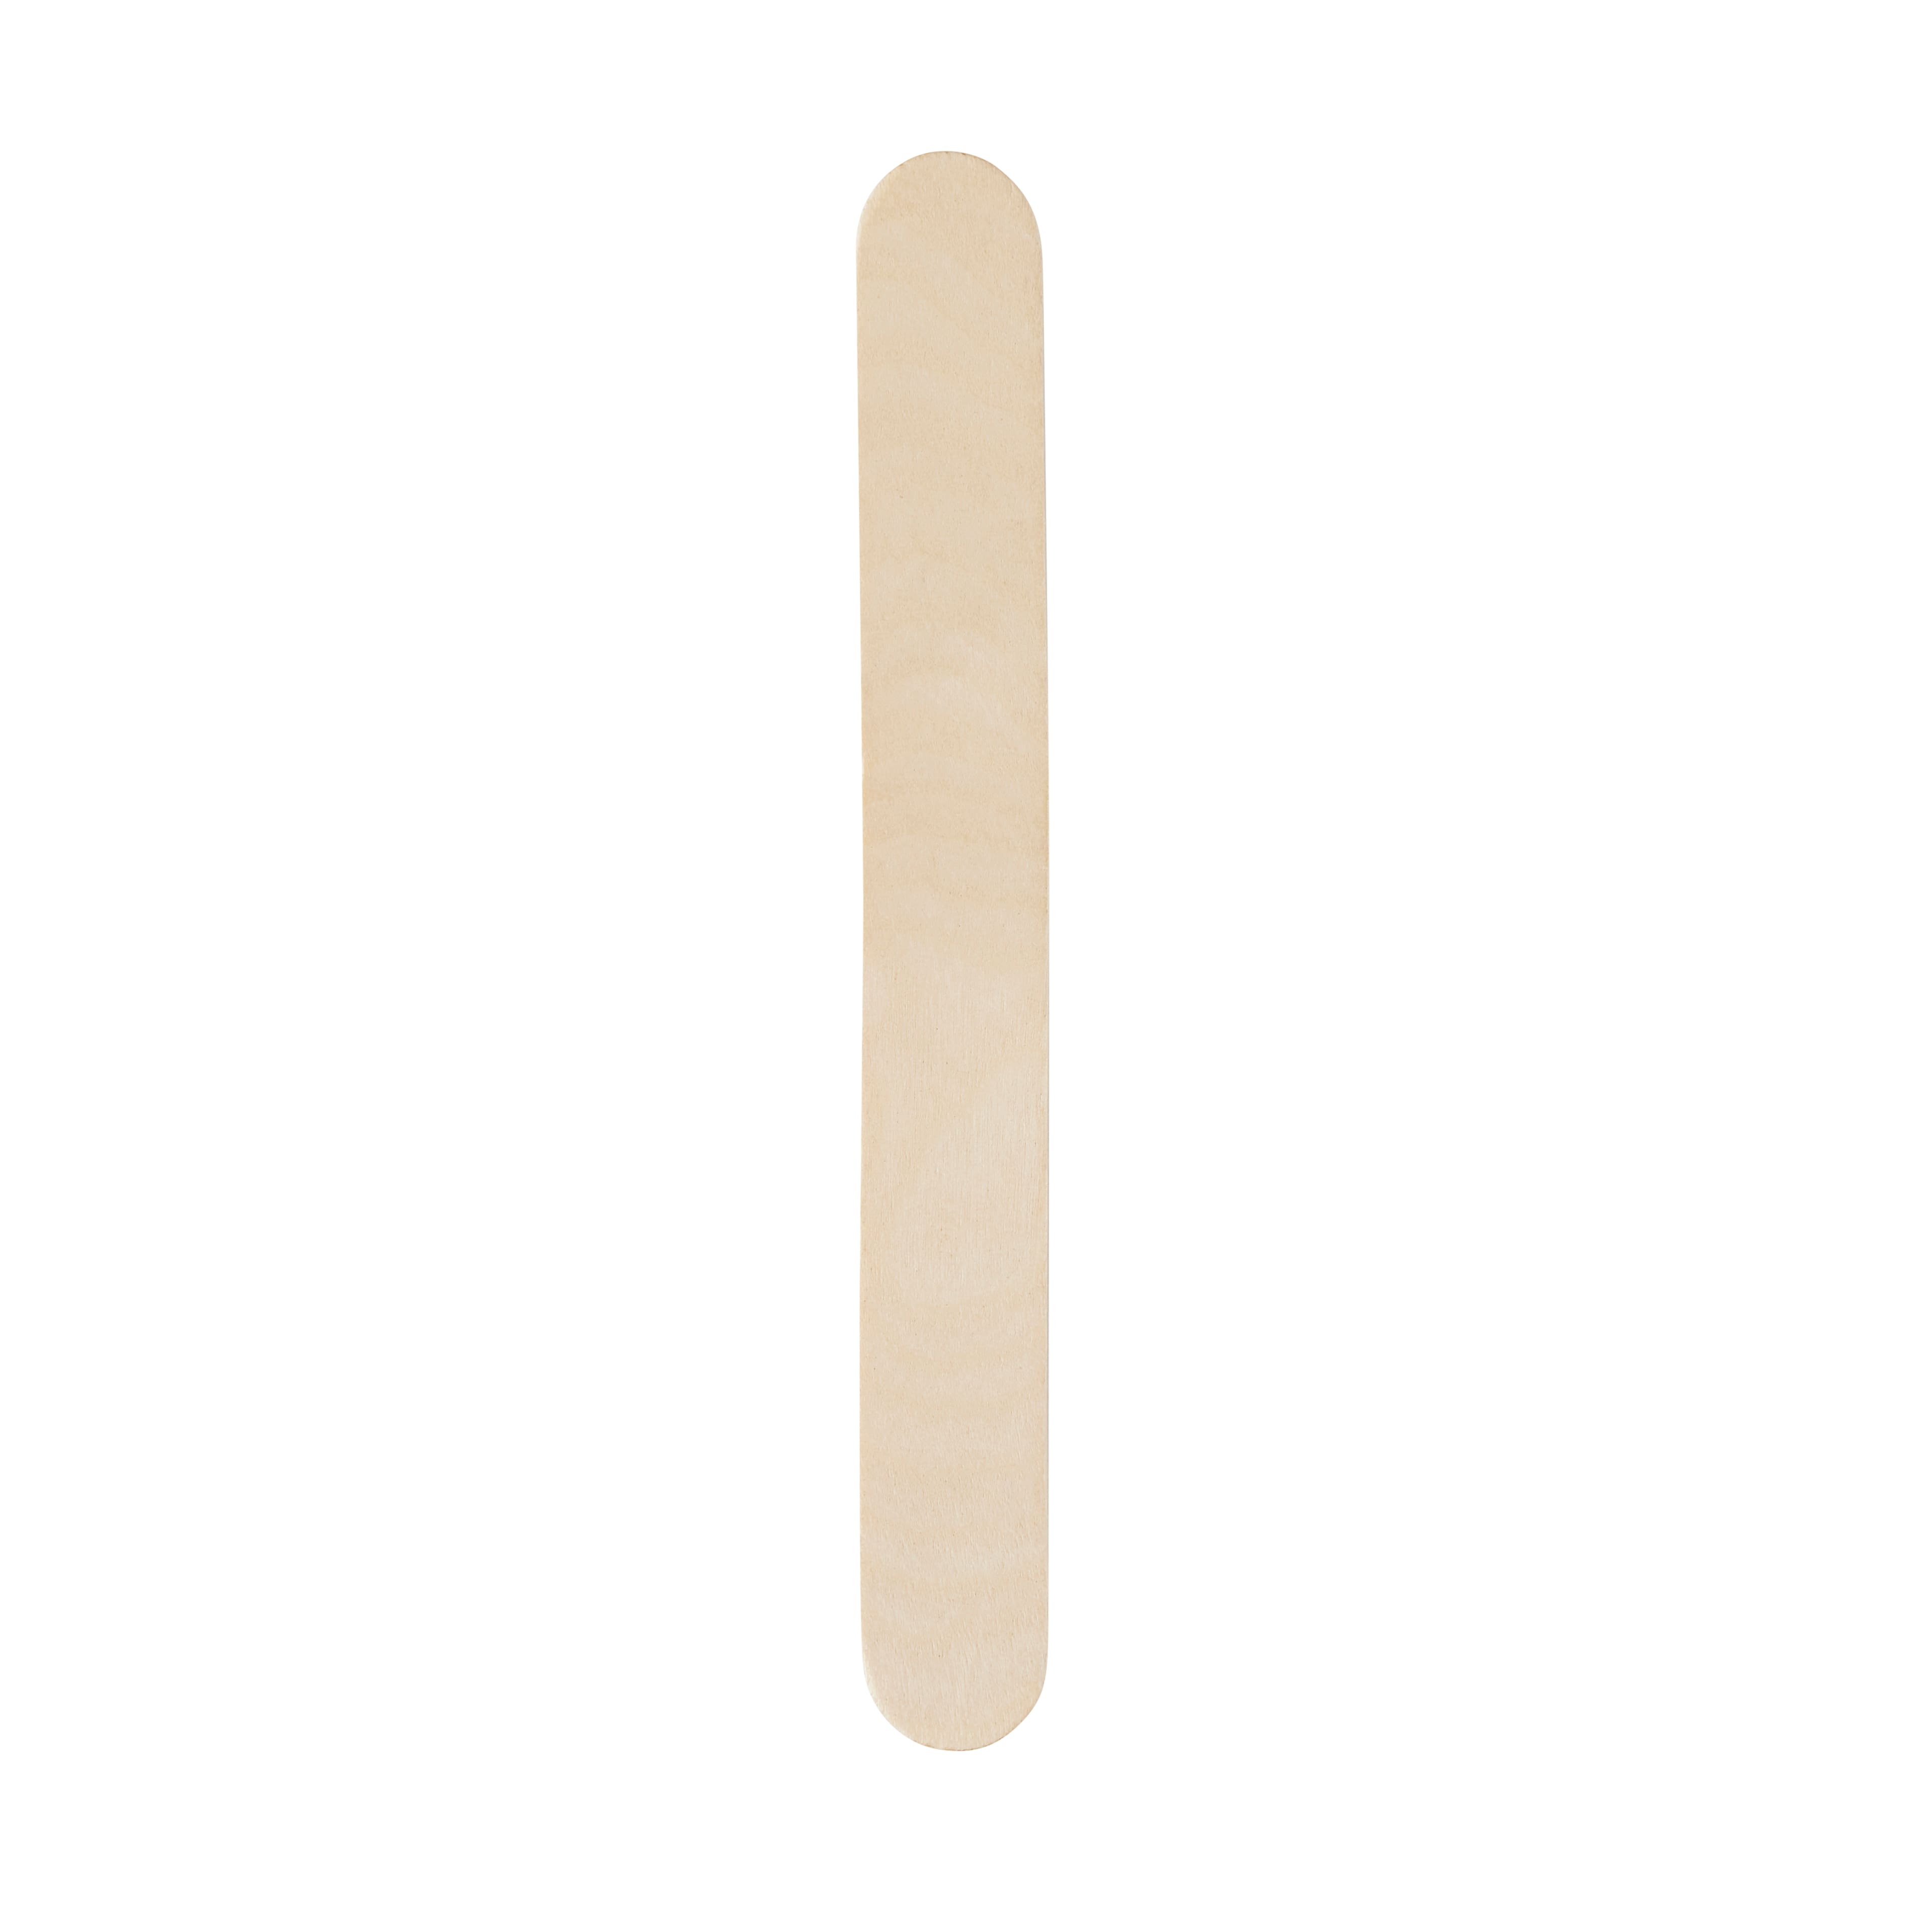 Unfinished Jumbo Craft Sticks 6inch, Pack of 2500 Large Popsicle Sticks for  Crafts, Wax Sticks & Wood Tongue Depressors, by Woodpeckers 